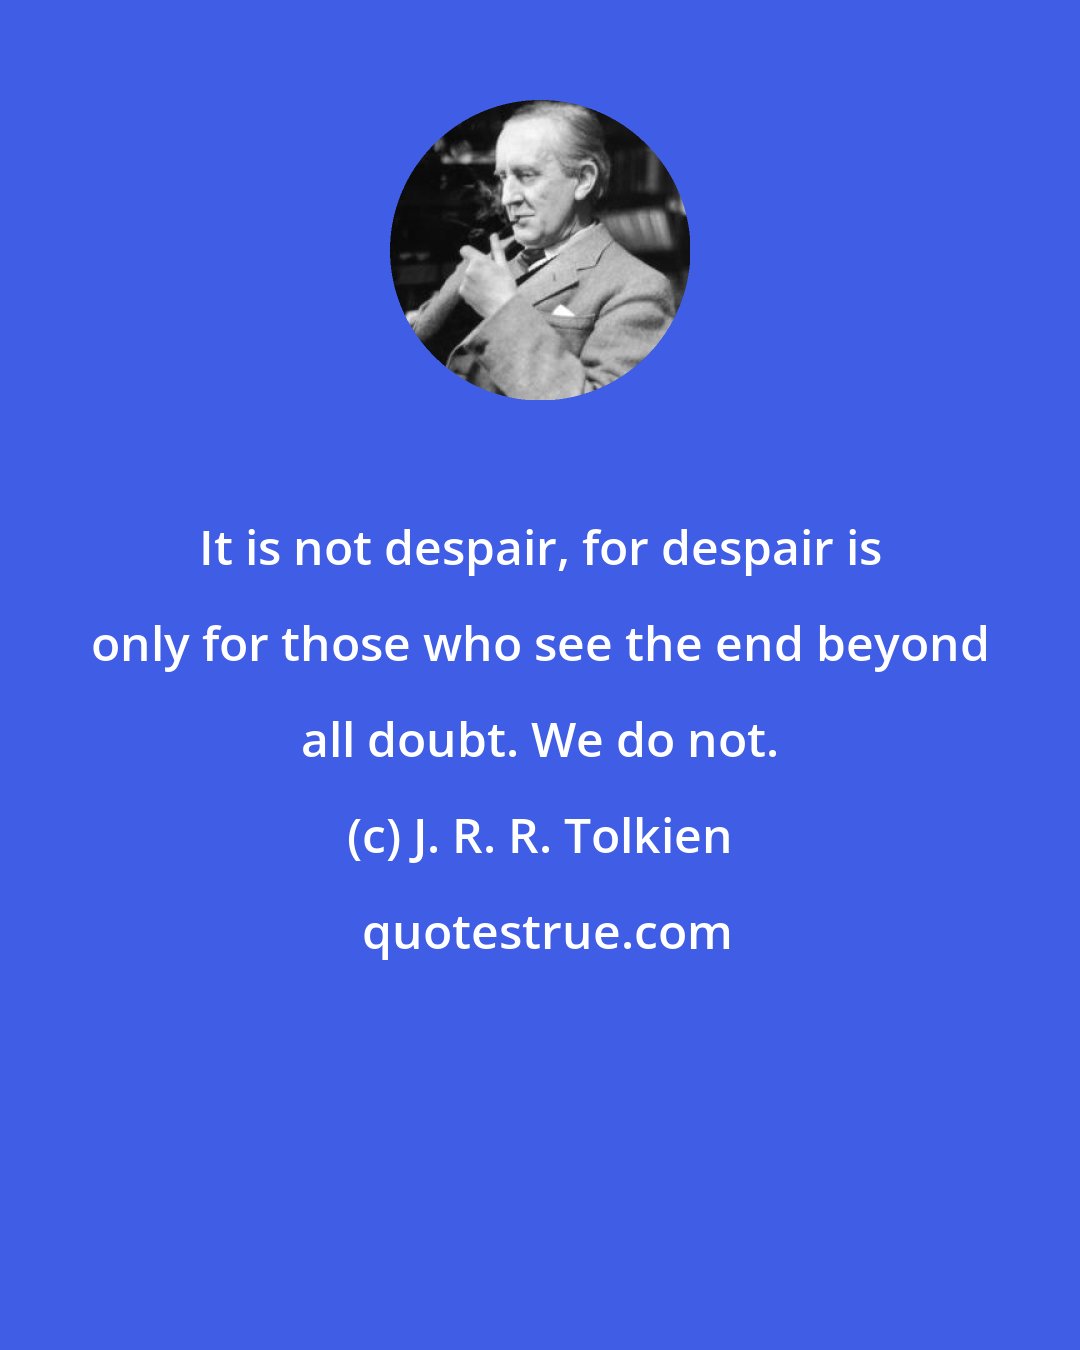 J. R. R. Tolkien: It is not despair, for despair is only for those who see the end beyond all doubt. We do not.